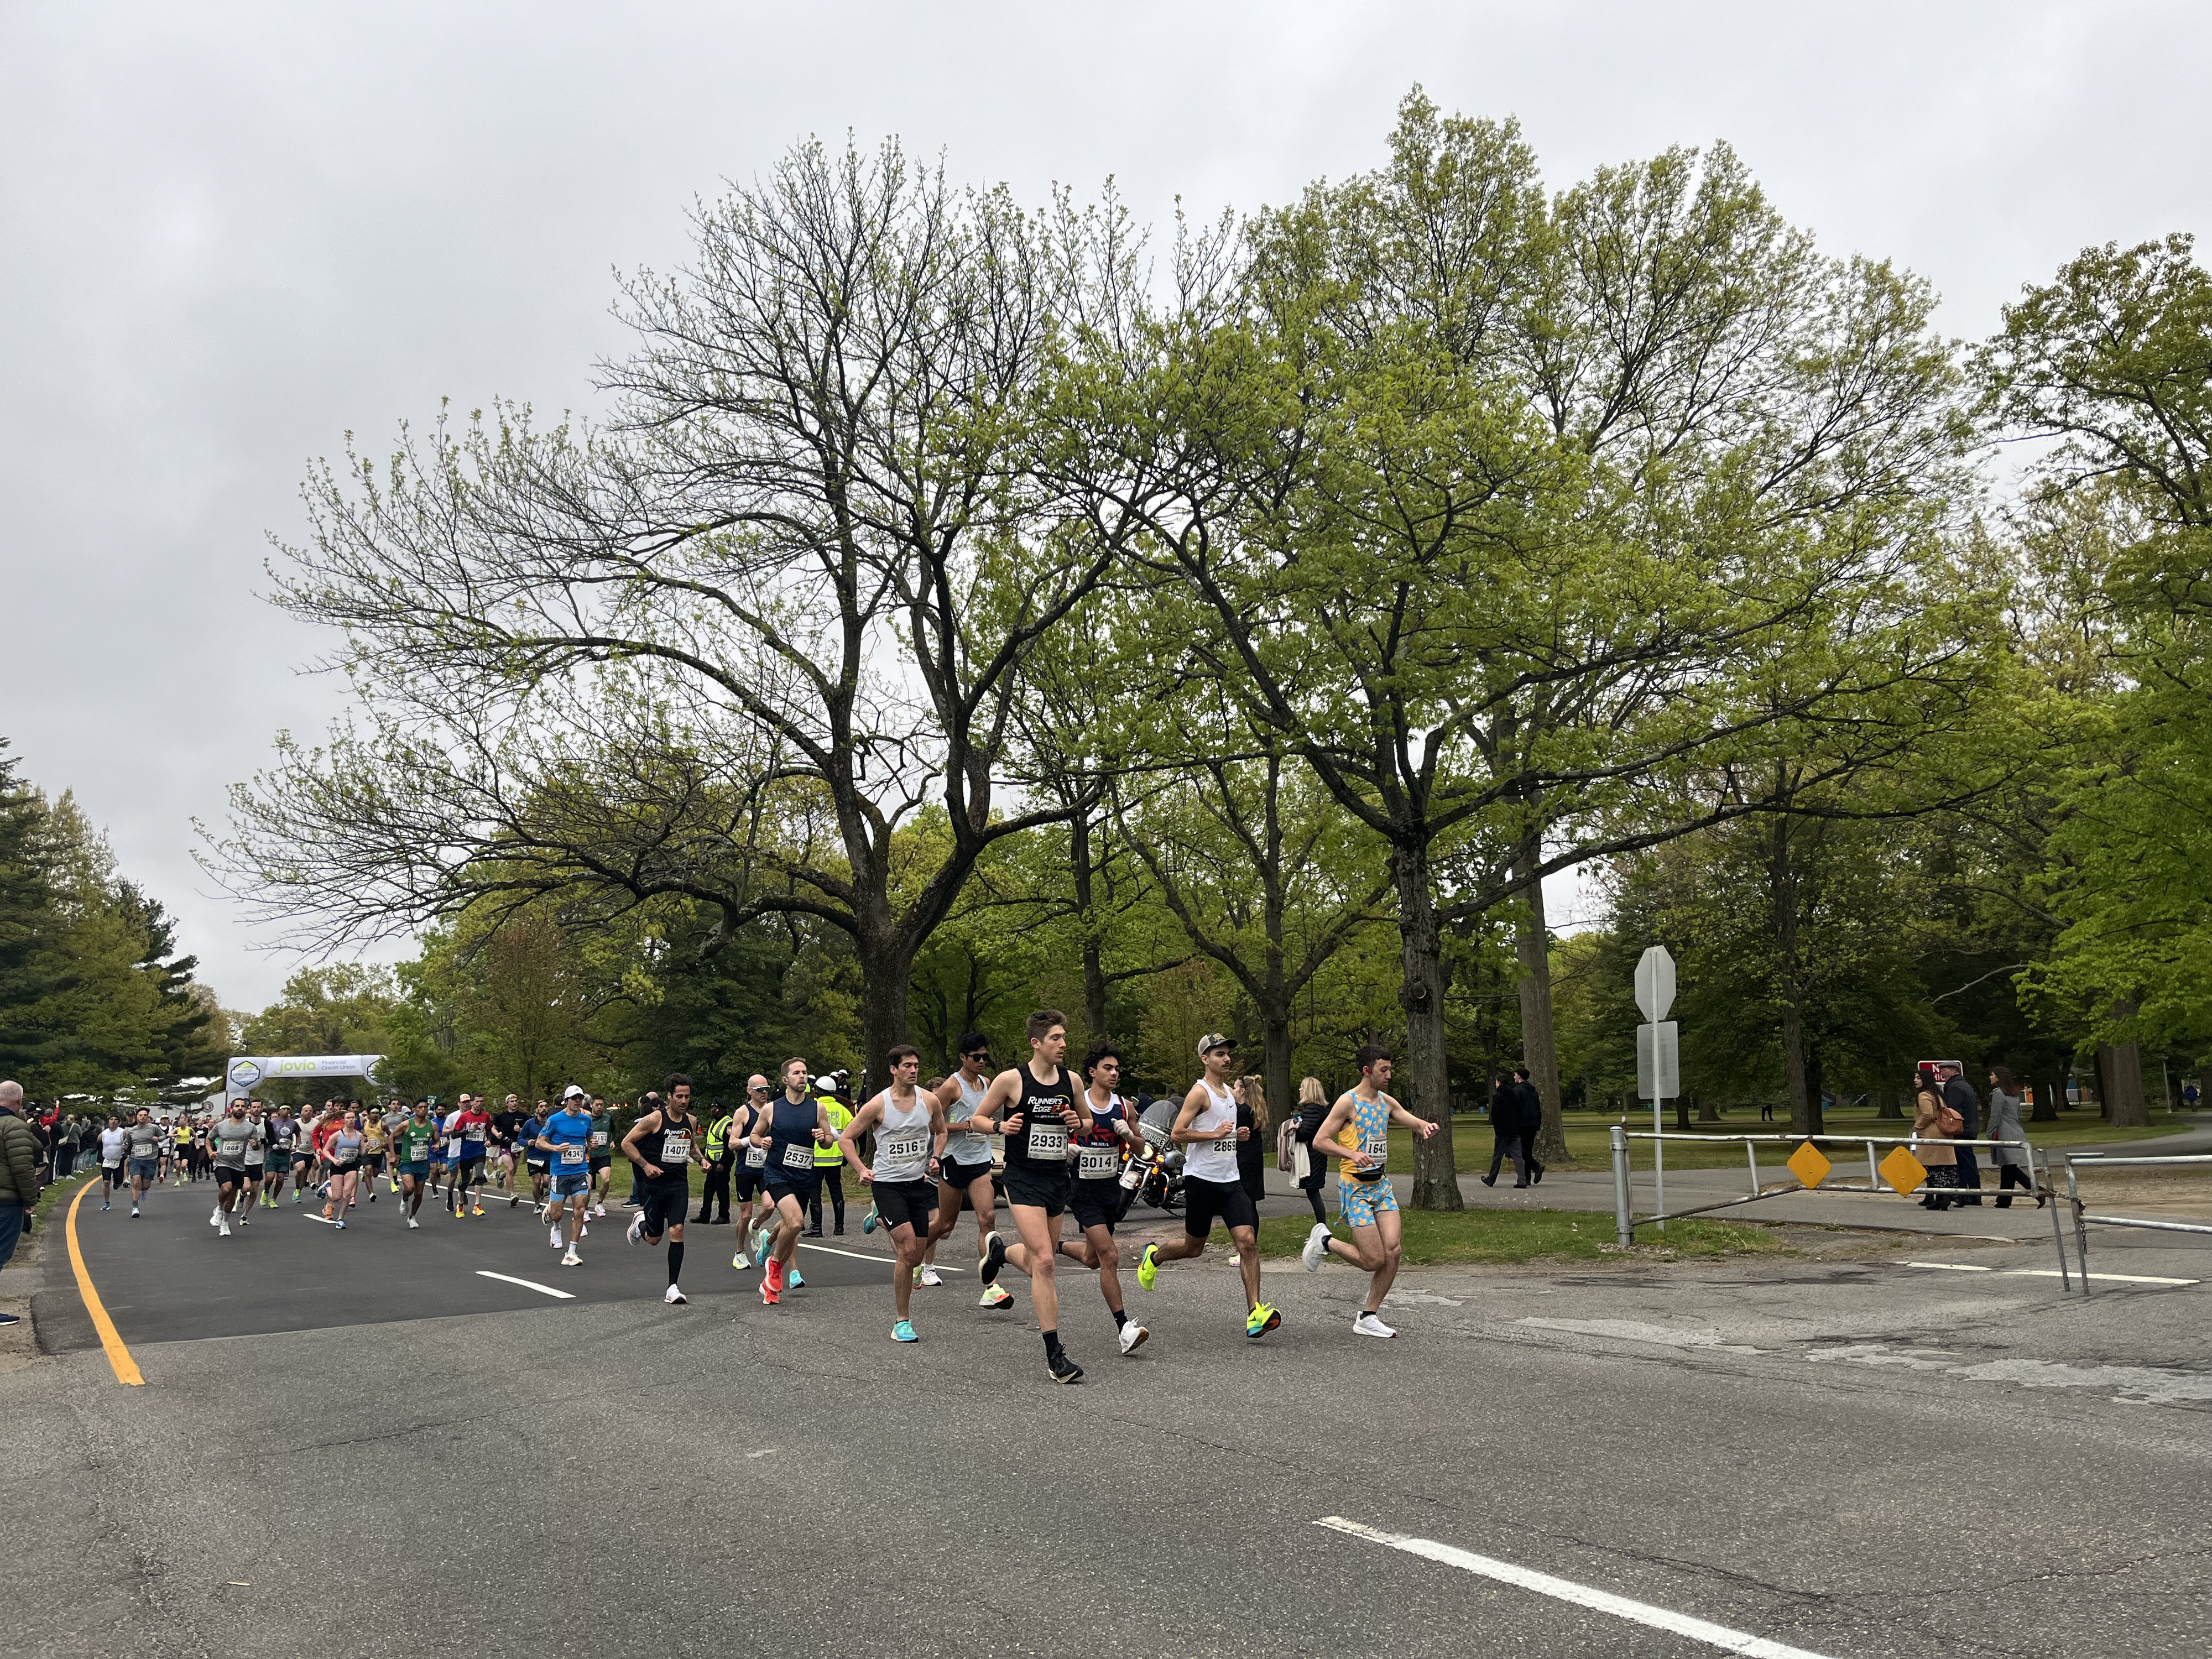 Thousands of athletes compete in the Long Island Marathon